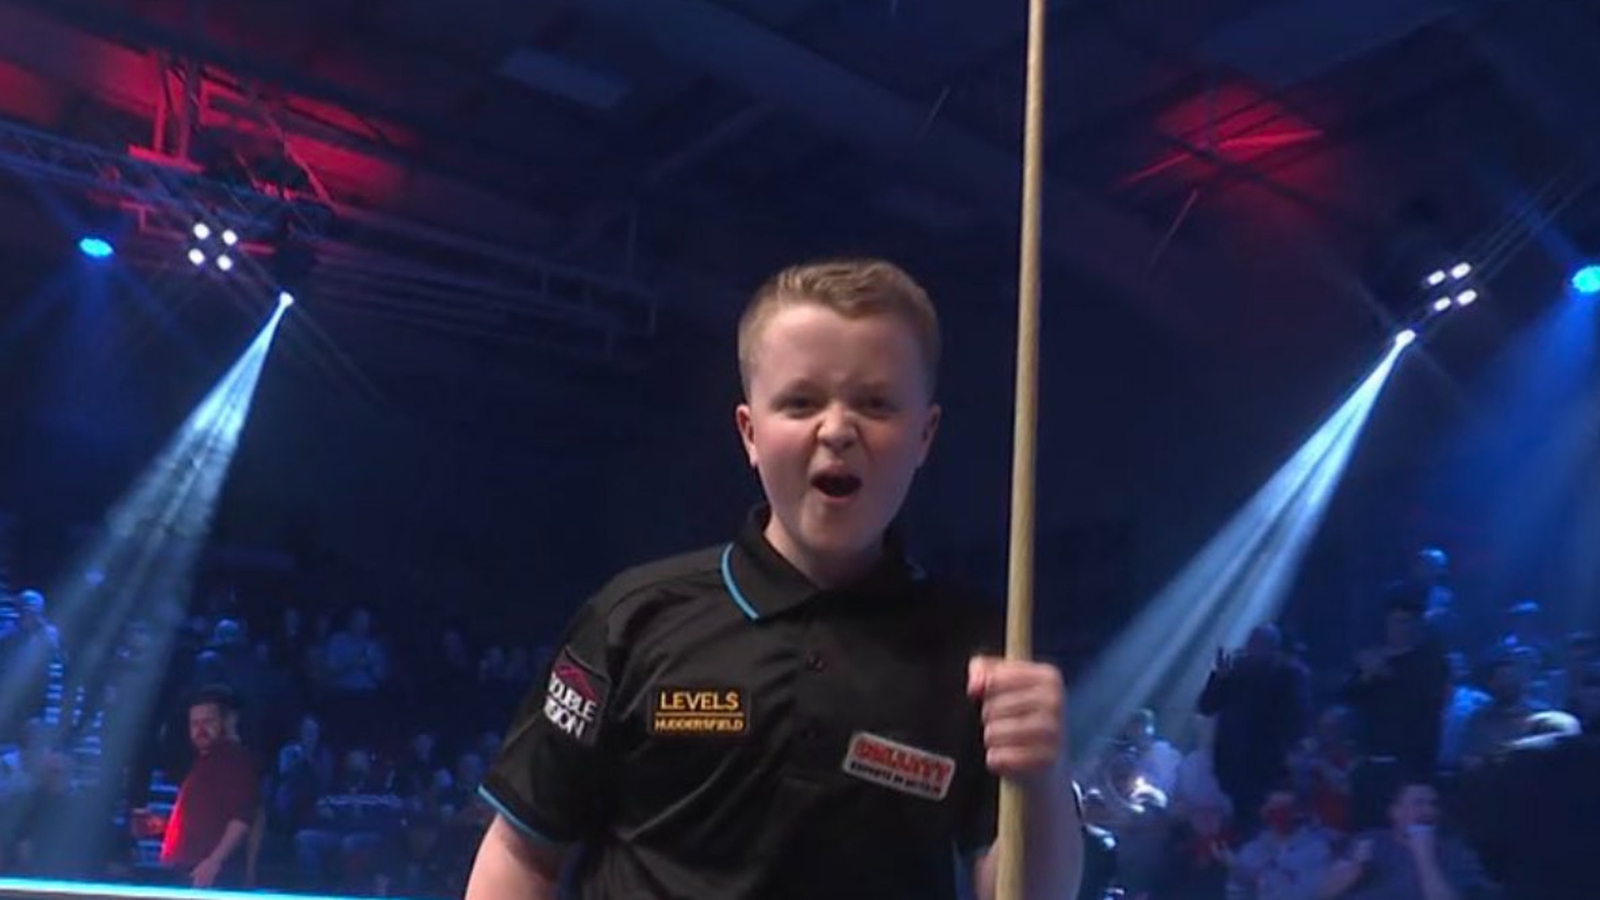 15-year-old beats professional at Snooker Shoot Out